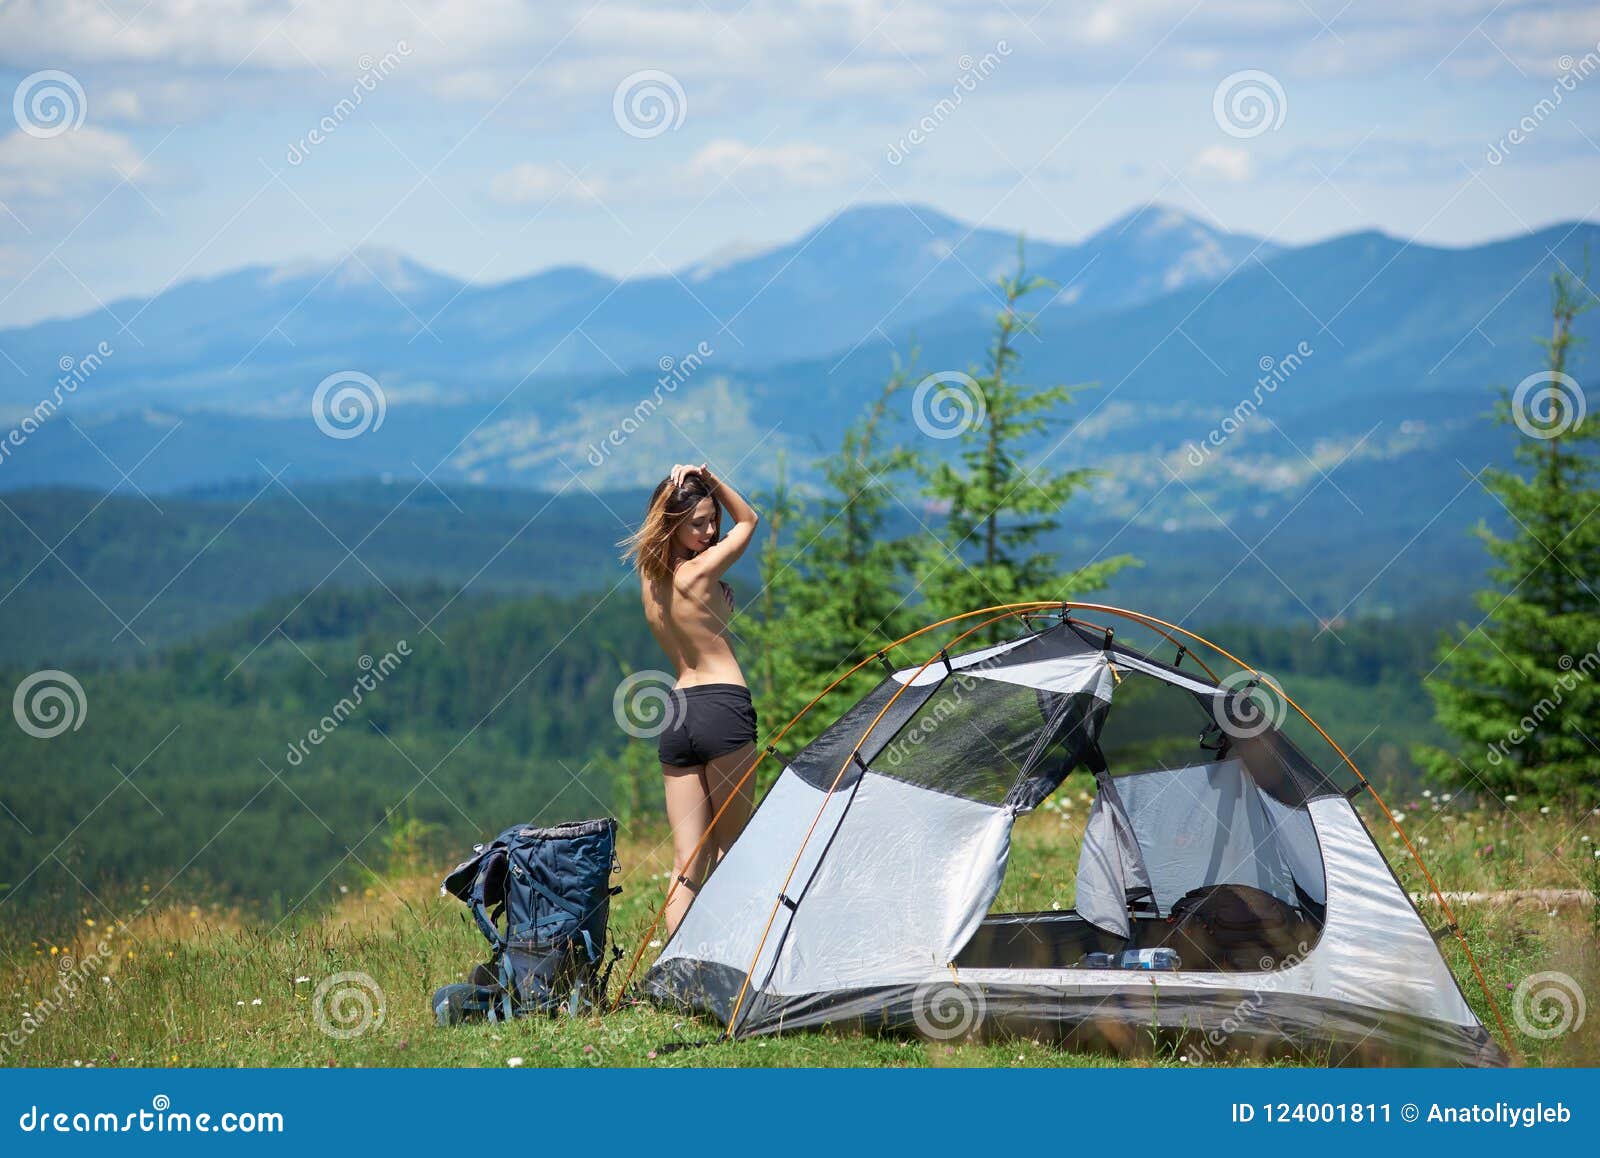 chase conaway add photo naked ladies camping